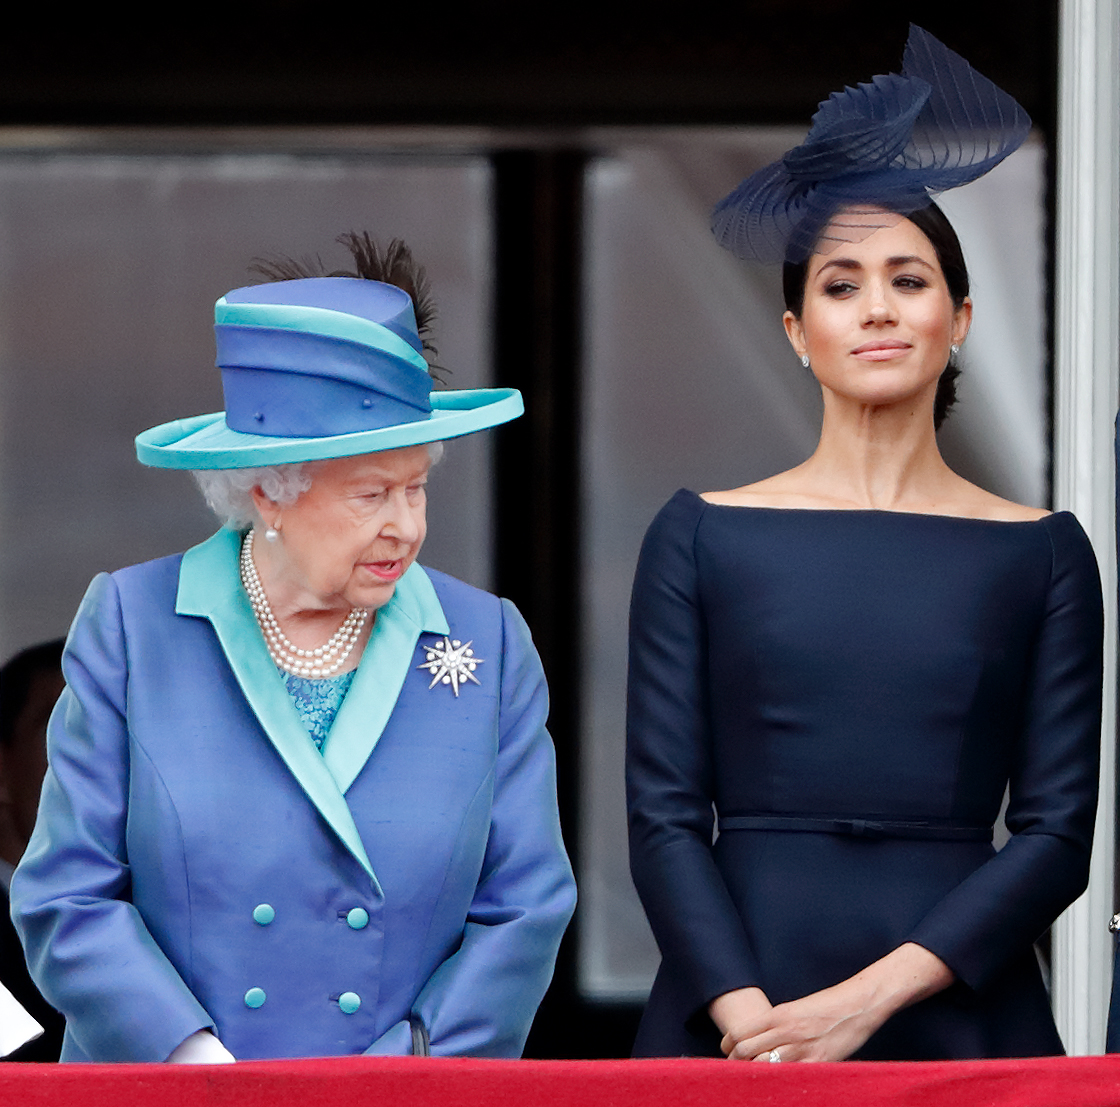 Watch cringe moment Meghan Markle mimics bowing to the Queen as she reveals she thought curtsying was a ‘joke’